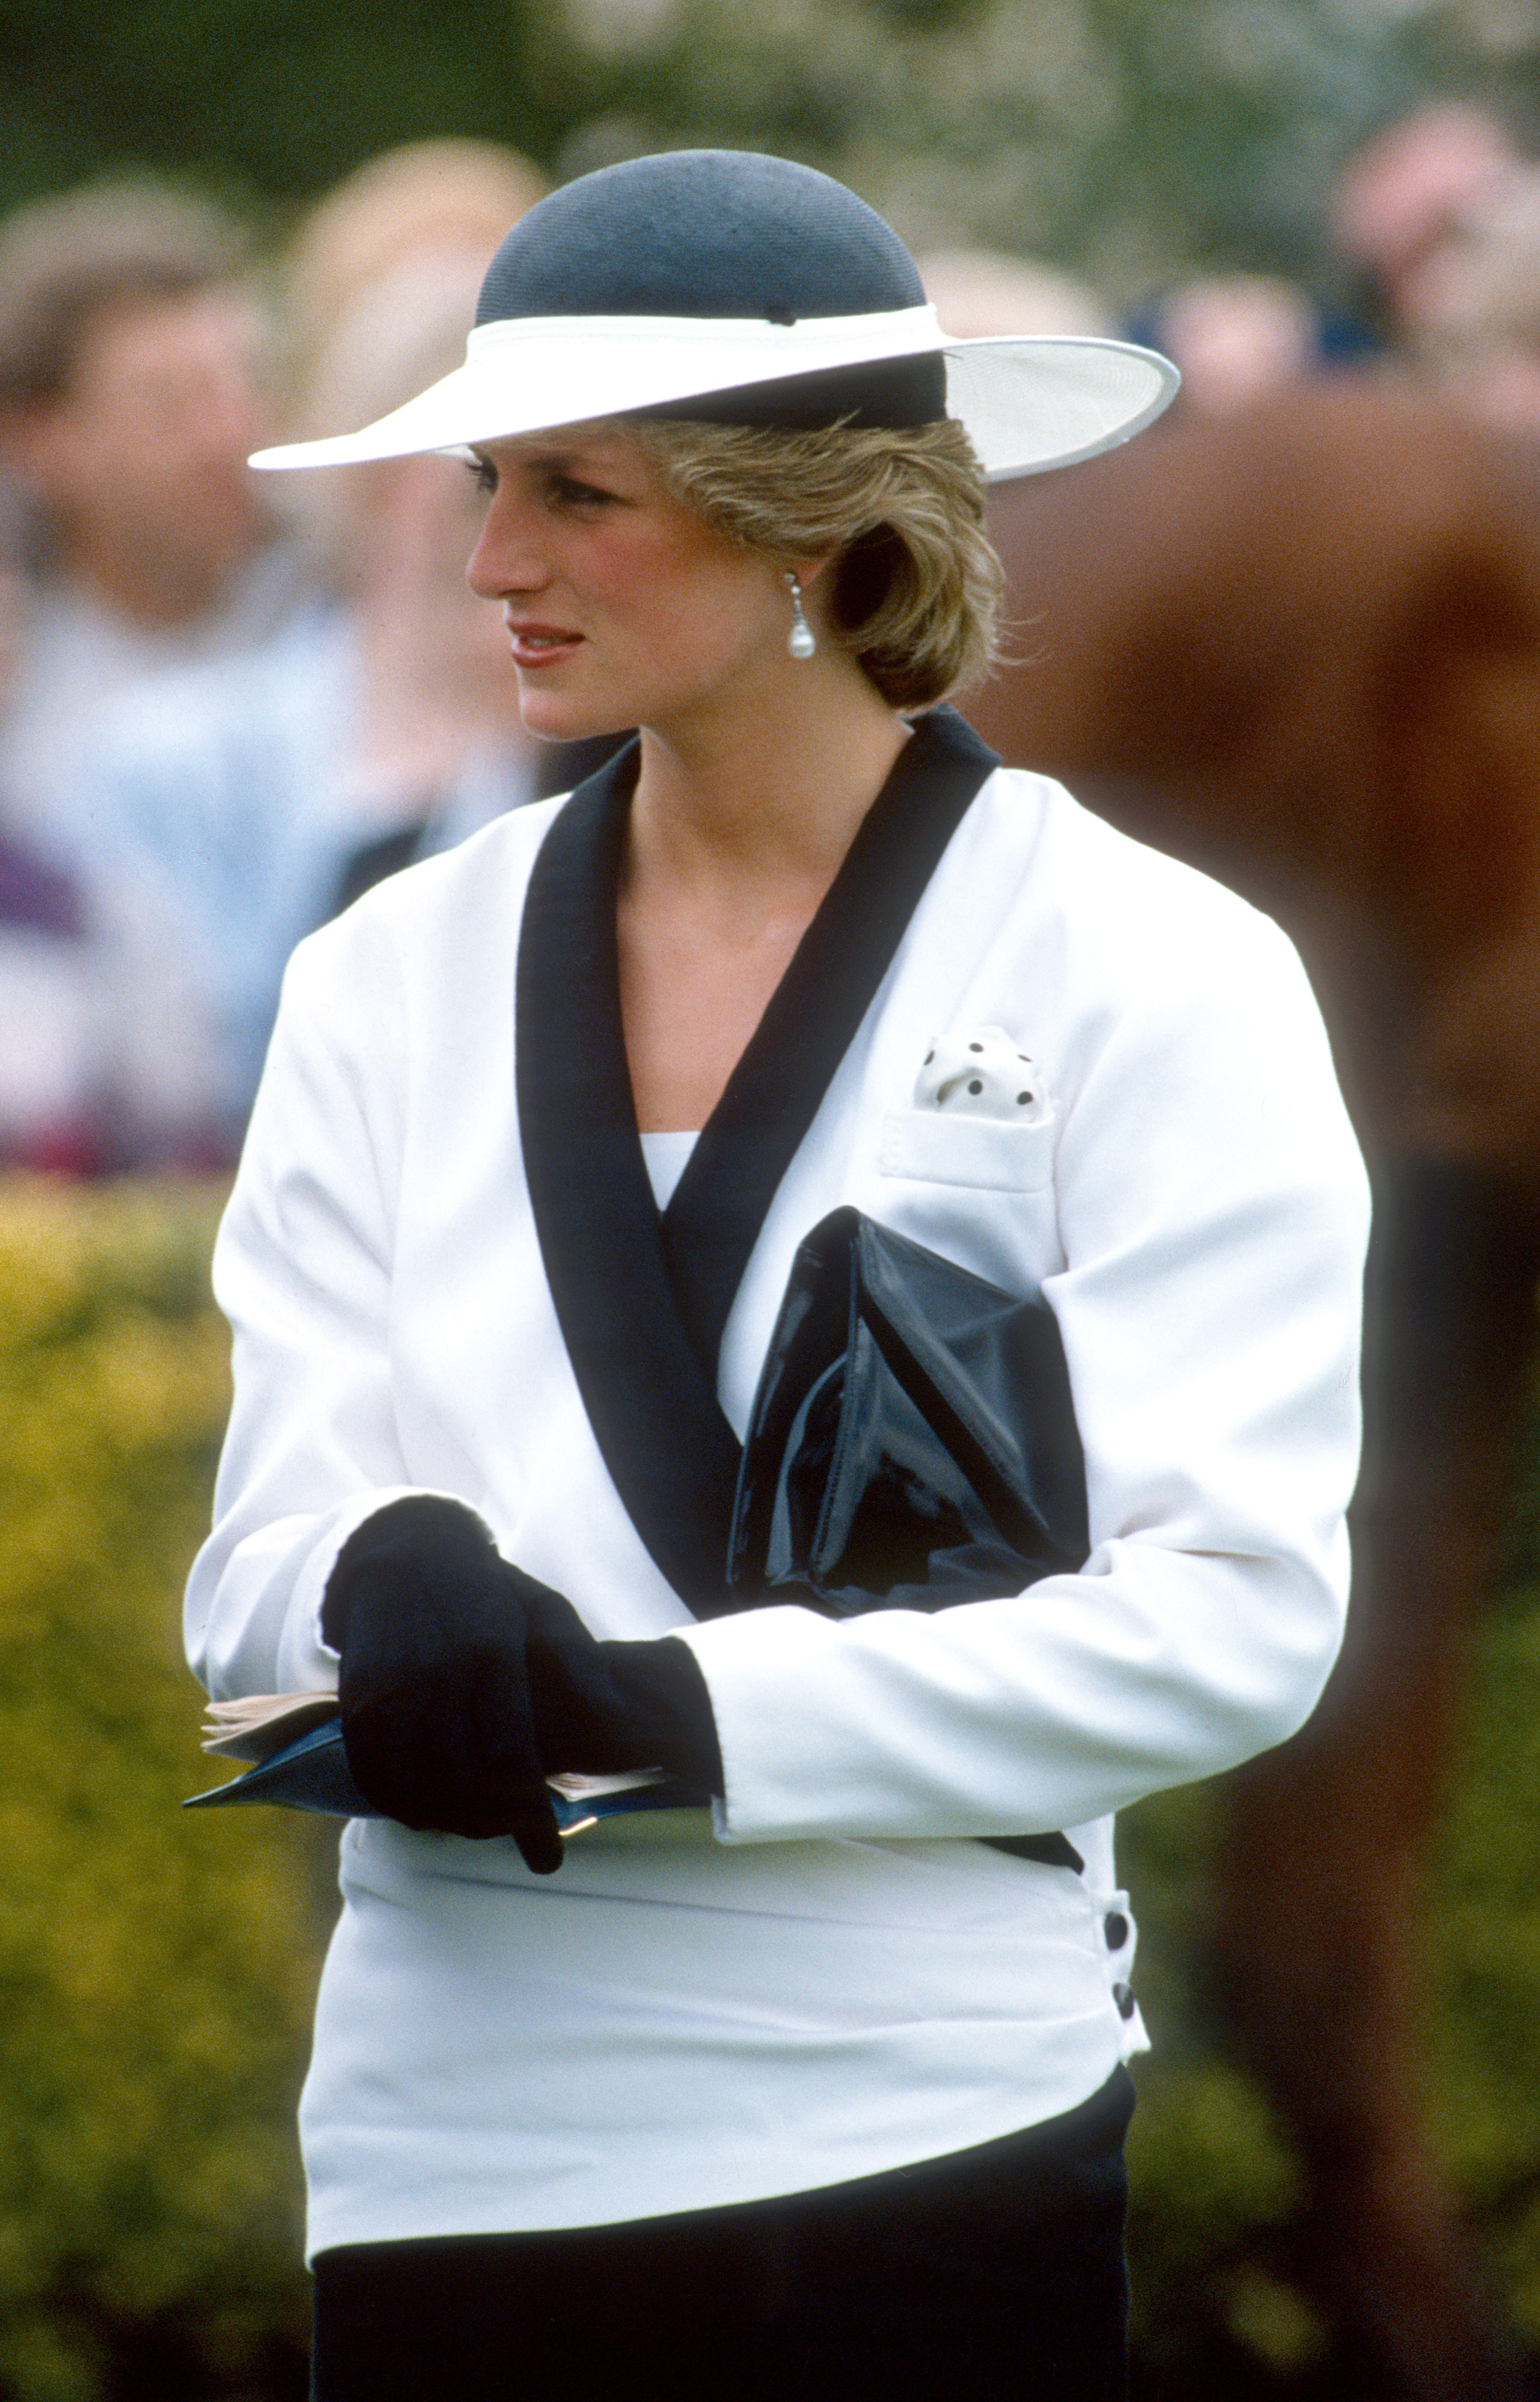 Princess Diana on November 5, 1985, in Melbourne, Australia. | Source: Getty Images